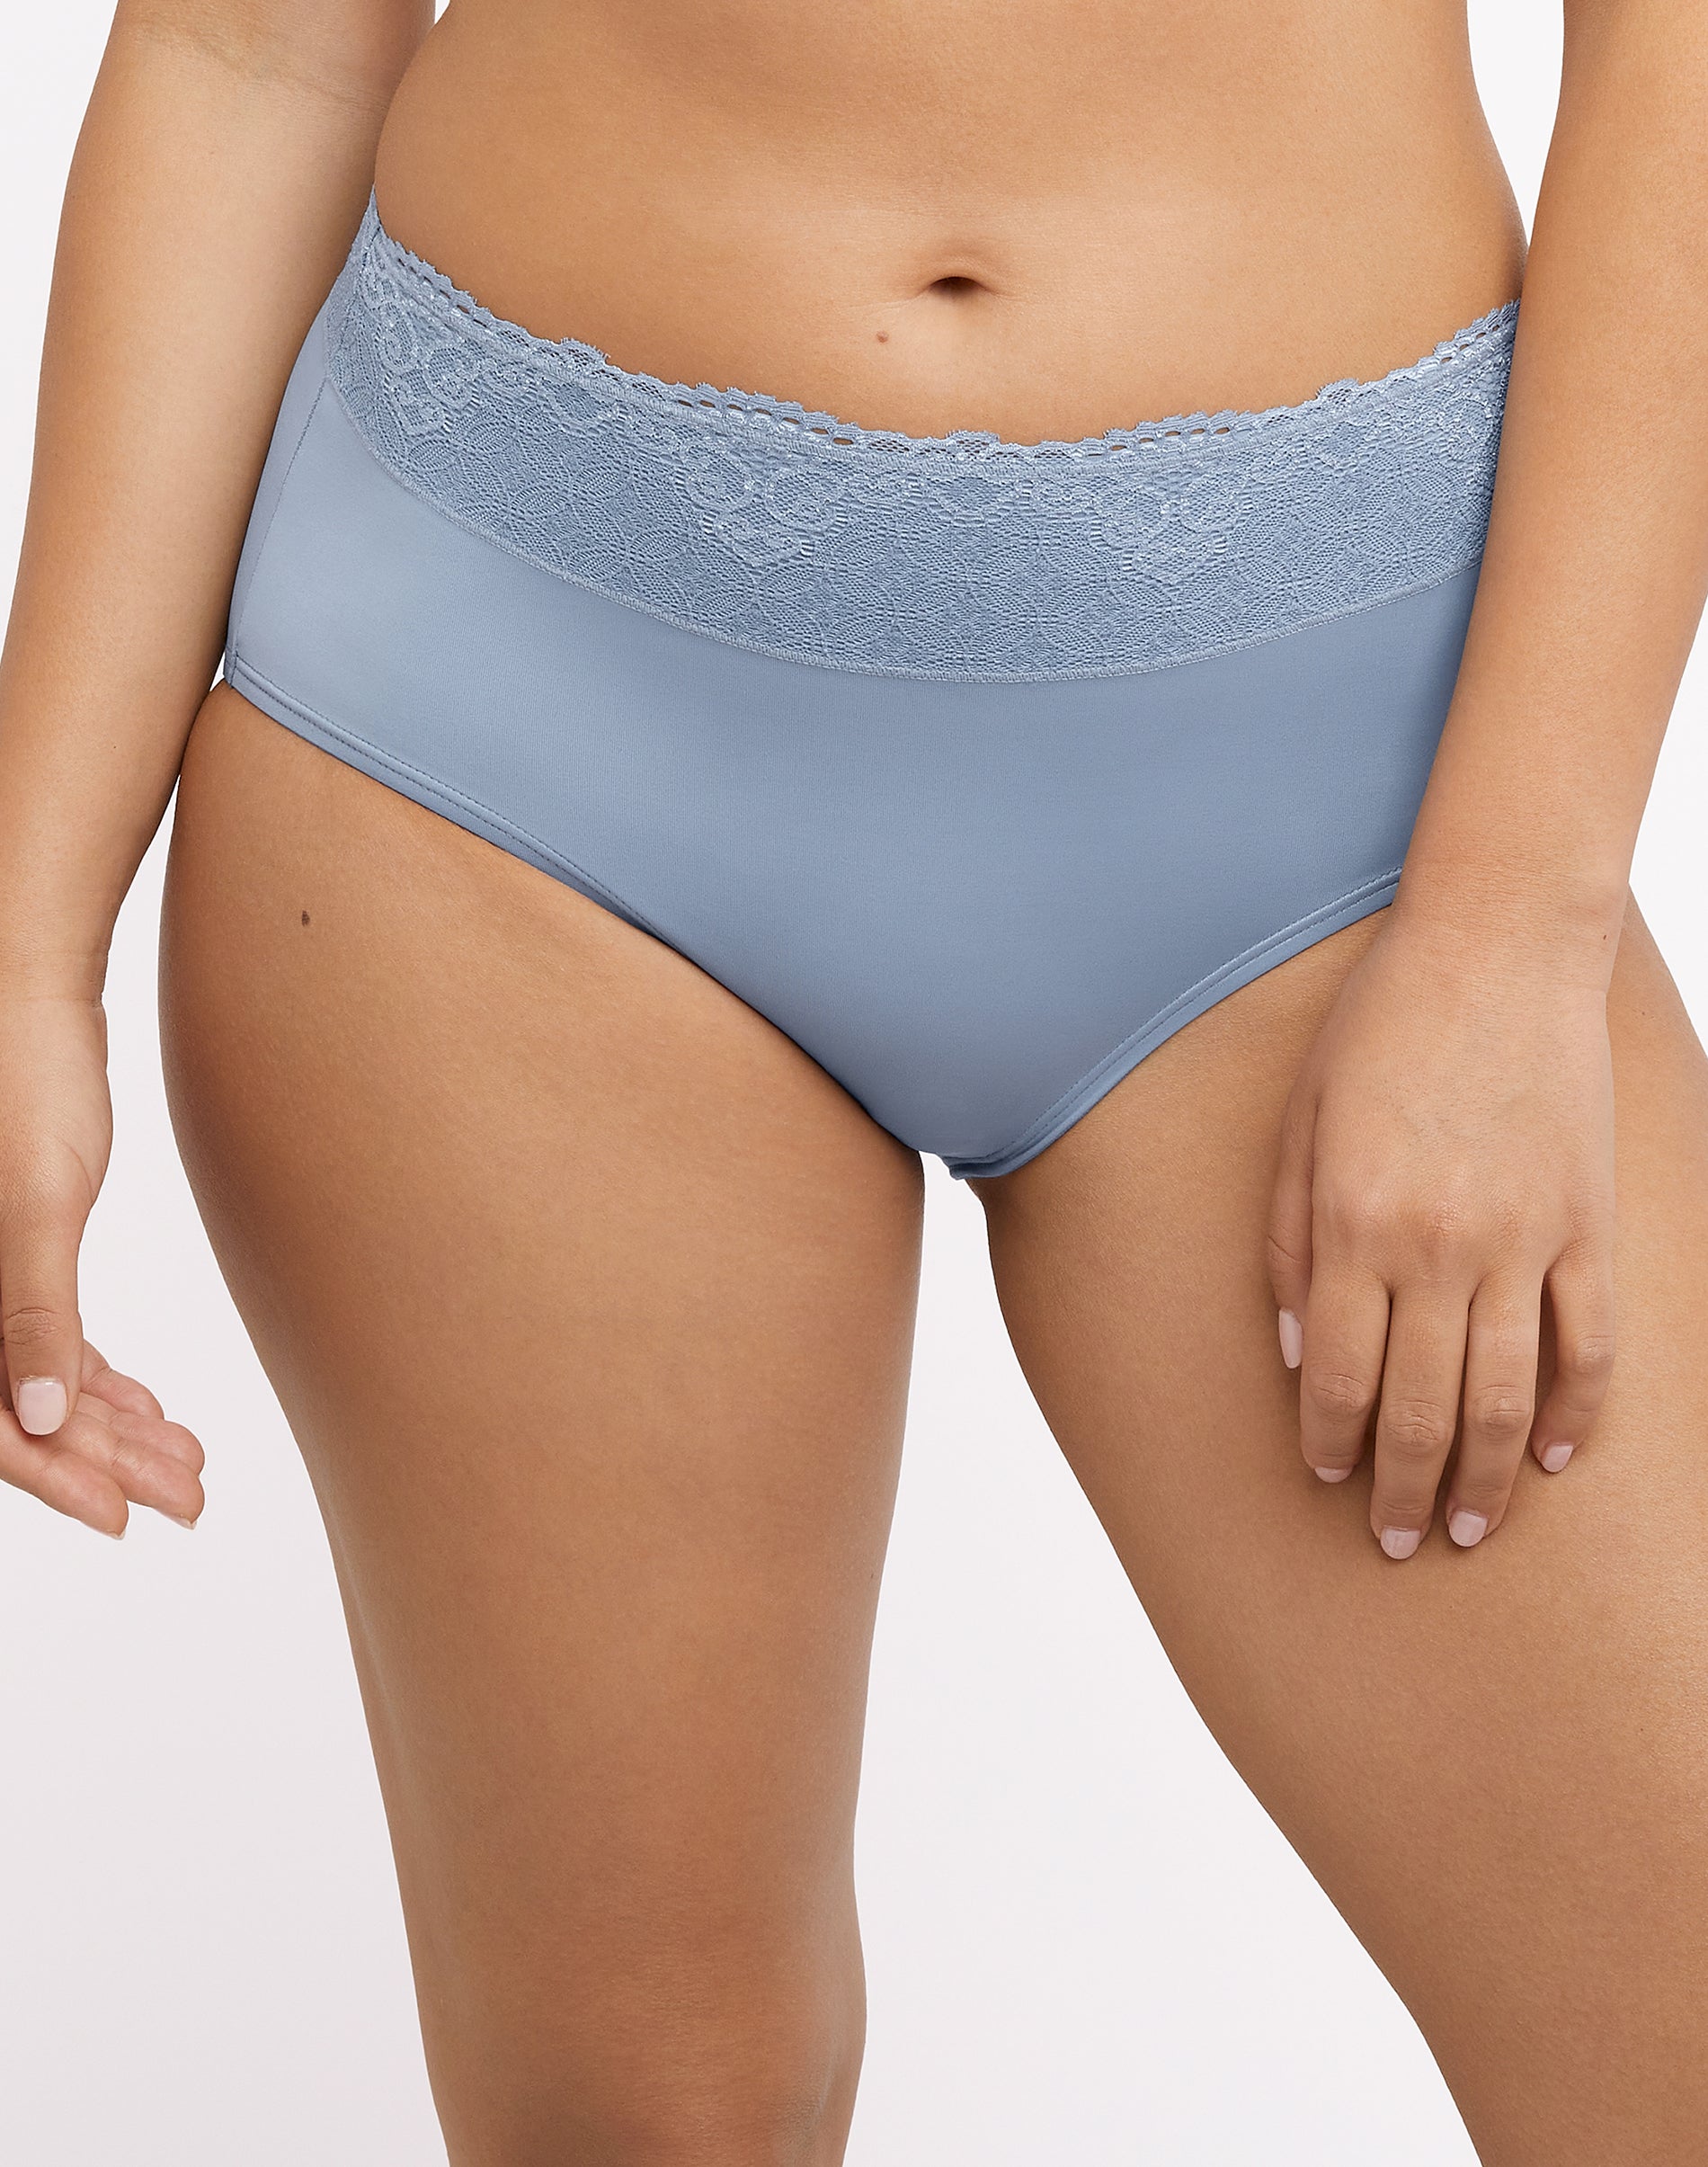 Women's Bali DFDBBF Double Support Brief Panty (Classic Chambray Blue 7)